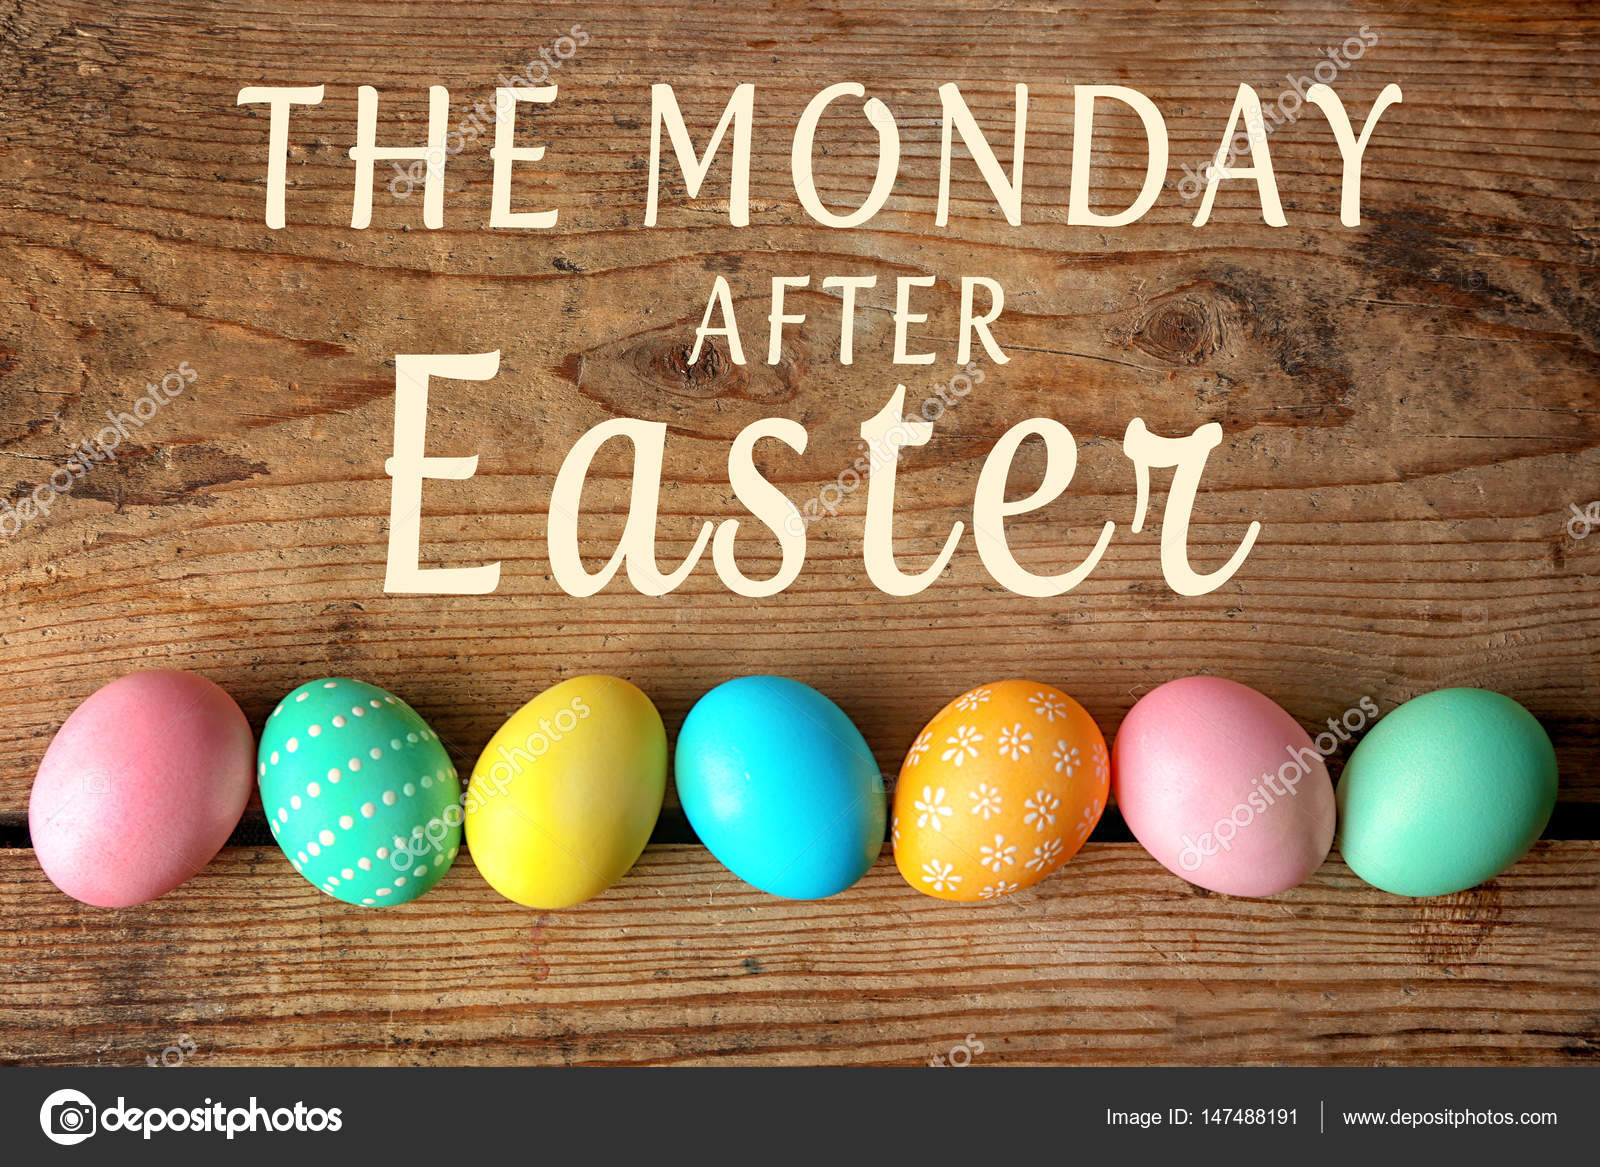 MONDAY AFTER EASTER text Stock Photo by ©belchonock 147488191